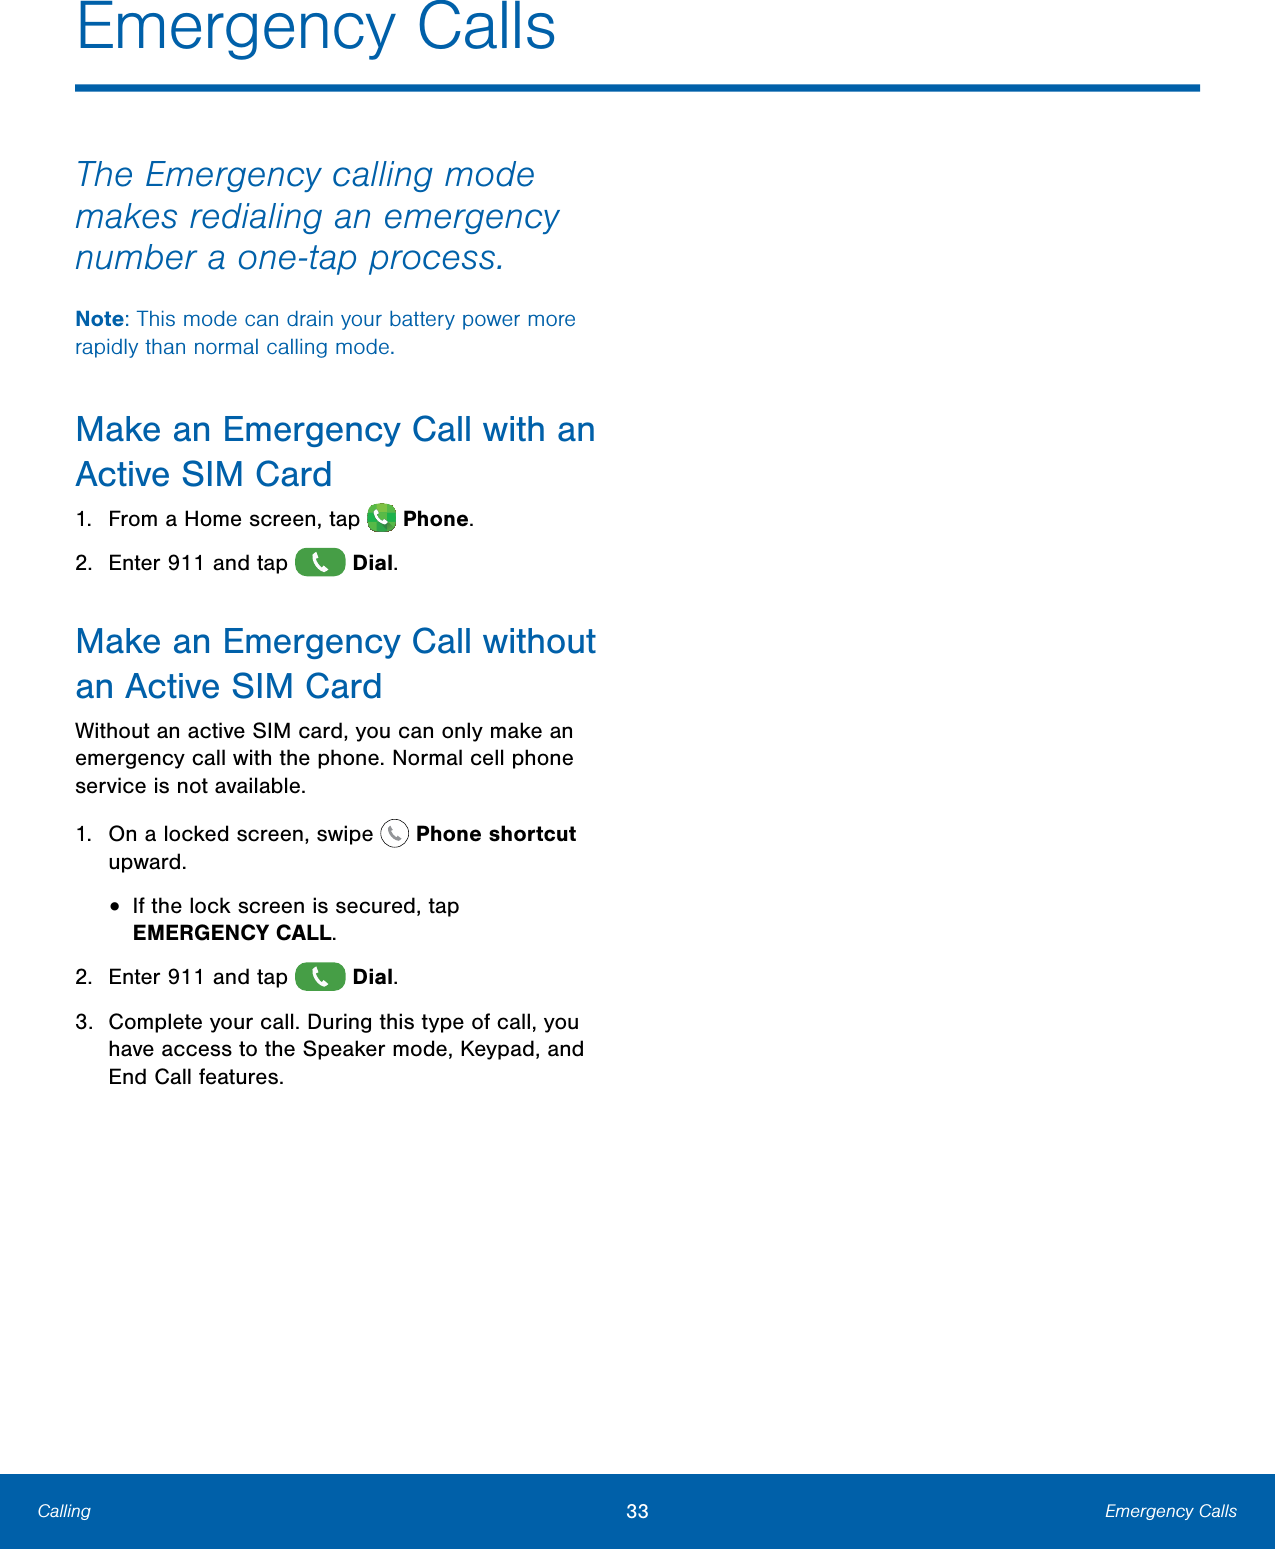              Emergency Calls  The Emergency calling mode makes redialing an emergency number a one-tap process. Note: This mode can drain your battery power more rapidly than normal calling mode. Make an Emergency Call with an Active SIMCard 1.  From a Home screen, tap  Phone. 2.  Enter 911 and tap  Dial. Make an Emergency Call without an Active SIMCard Without an active SIM card, you can only make an emergency call with the phone. Normal cell phone service is not available. 1.  On a locked screen, swipe  Phoneshortcut upward. •  If the lock screen is secured, tap  EMERGENCYCALL.  2.  Enter 911 and tap  Dial. 3.  Complete your call. During this type of call, you have access to the Speaker mode, Keypad, and End Call features. Calling   33  Emergency Calls 